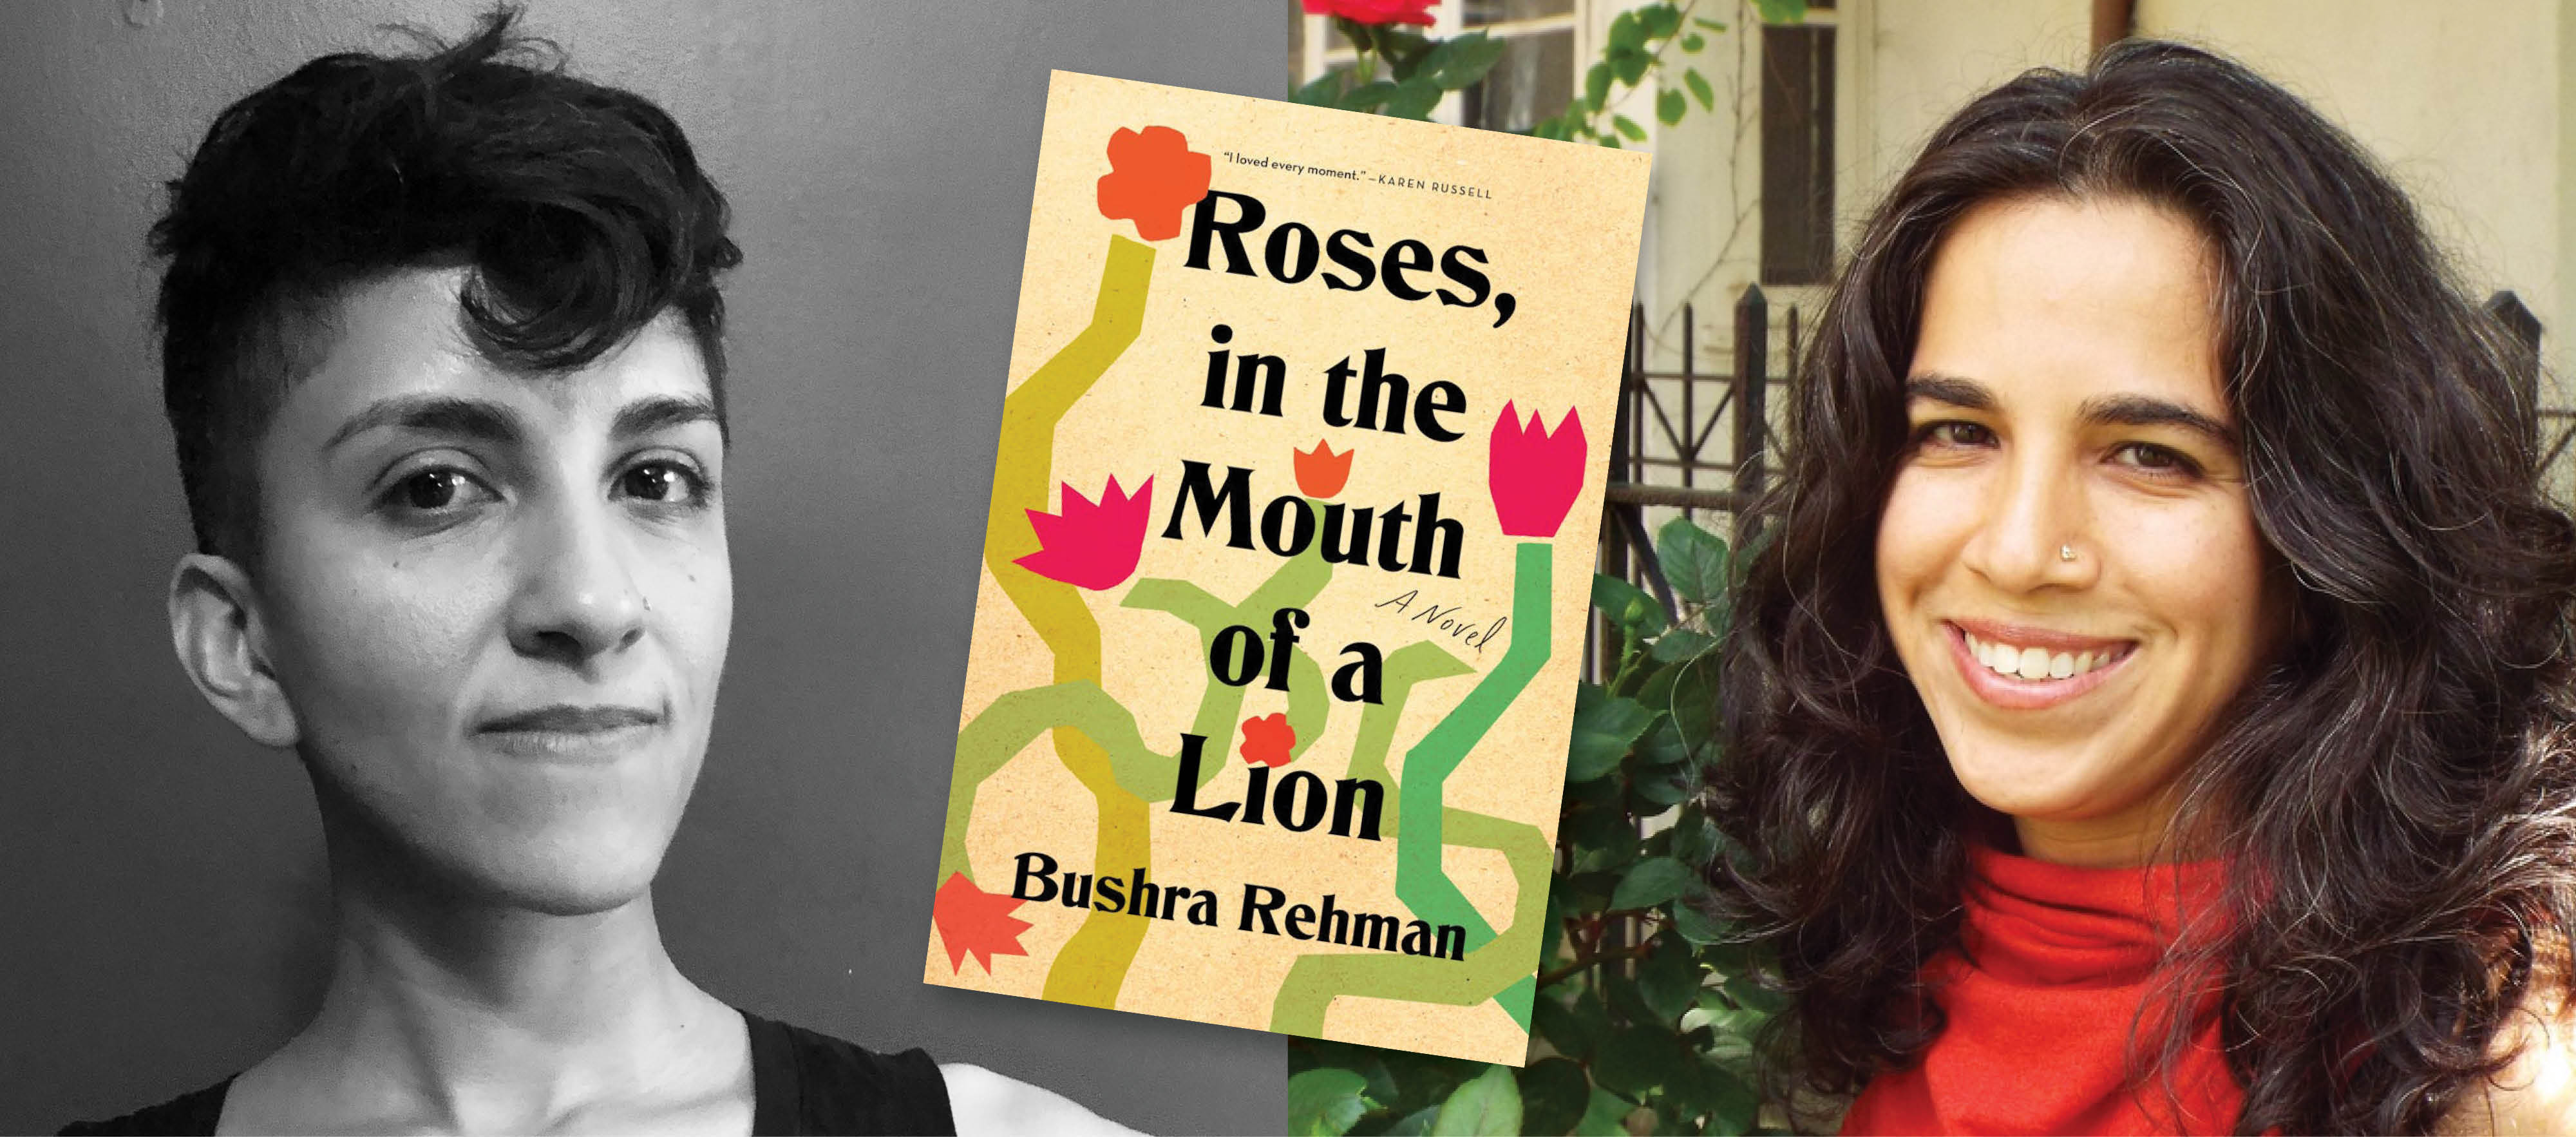 Collaged image featuring headshots of Sa'dia and Bushra Rehman. An image of Bushra Rehman's book, Roses in the Mouth of a Lion, is featured in the center of the image between the artist photos.